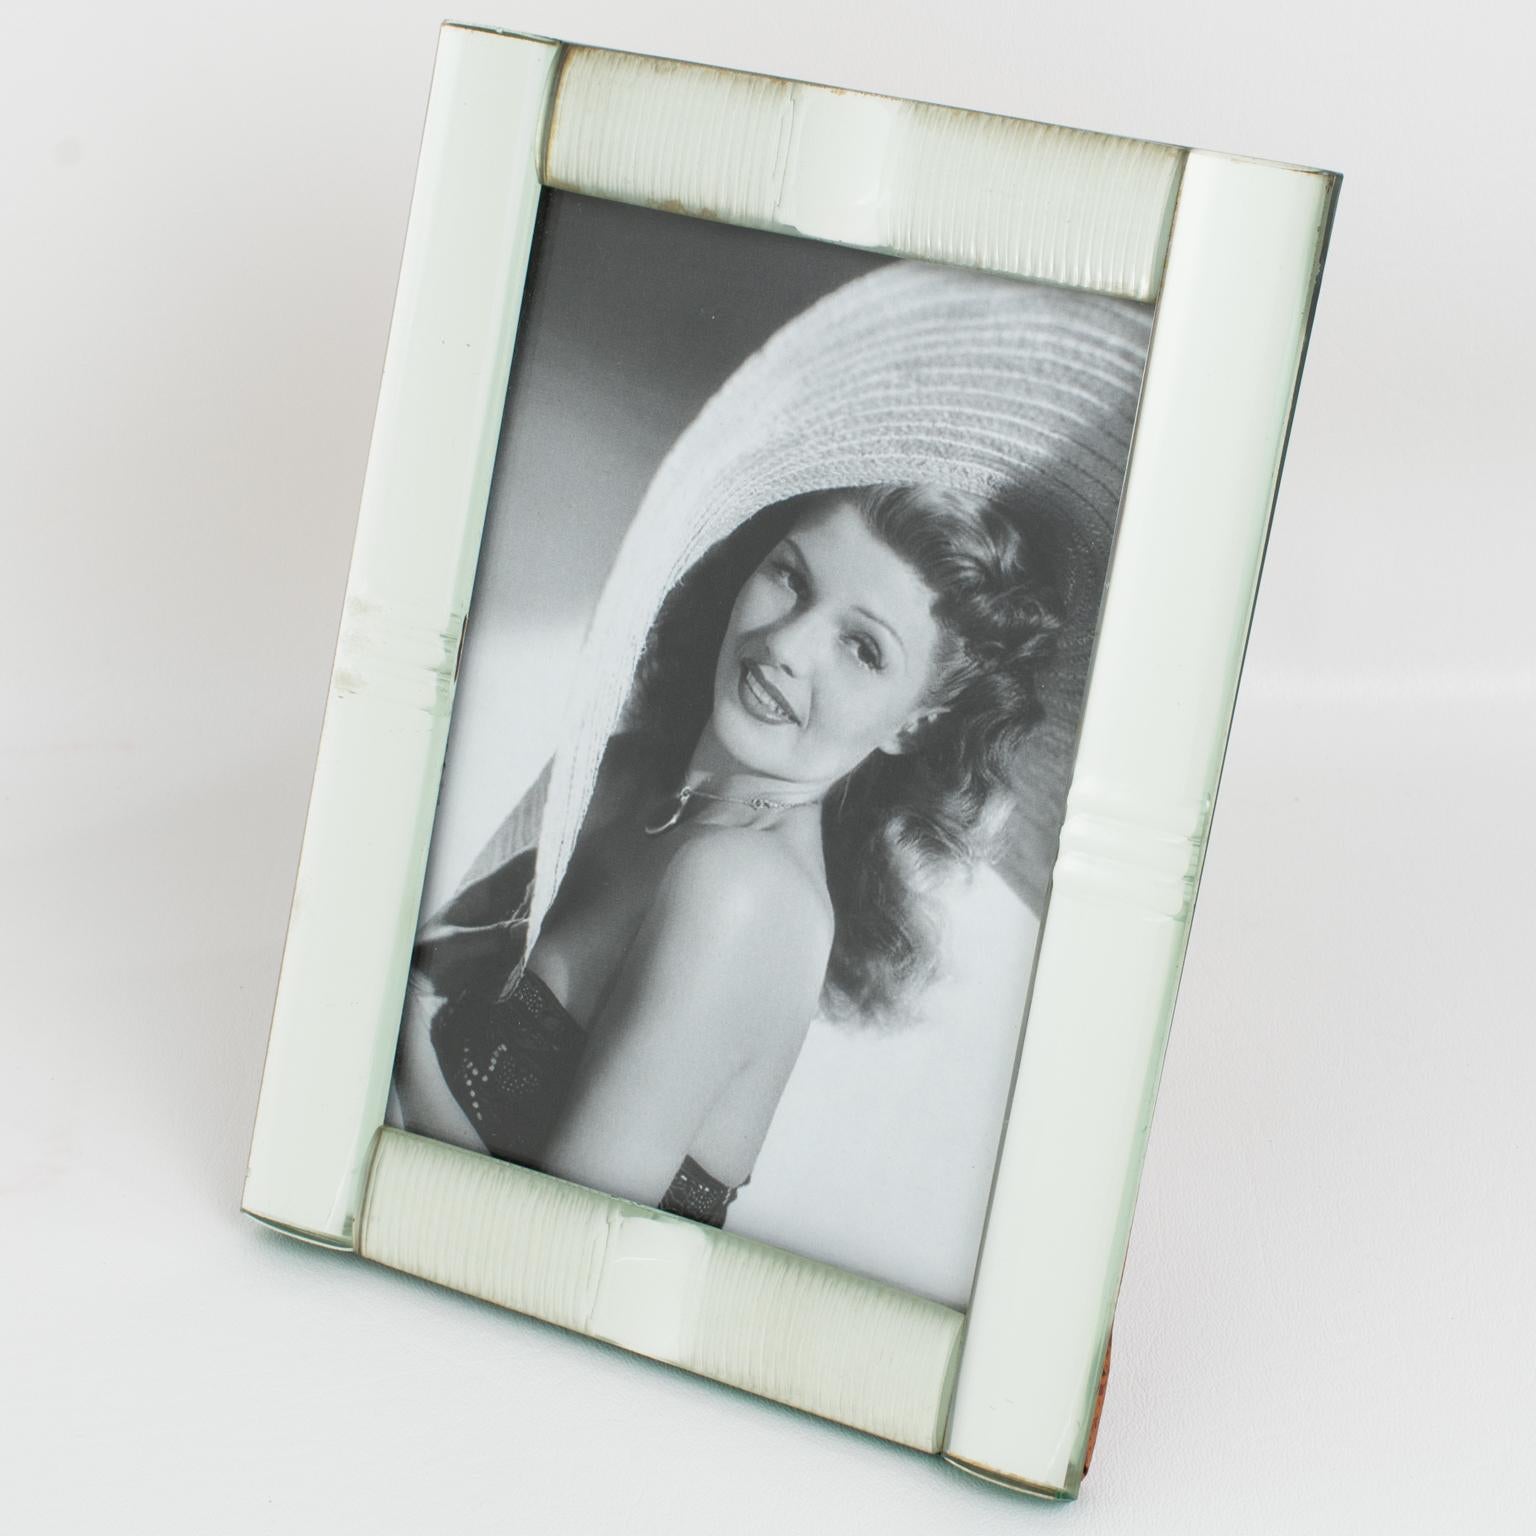 This elegant 1940s French mirrored picture photo frame features deep domed silver glass sides with striped carving. Although of French origin, the design of this frame is close to the glamorous American Hollywood Regency style of the 1940s. The